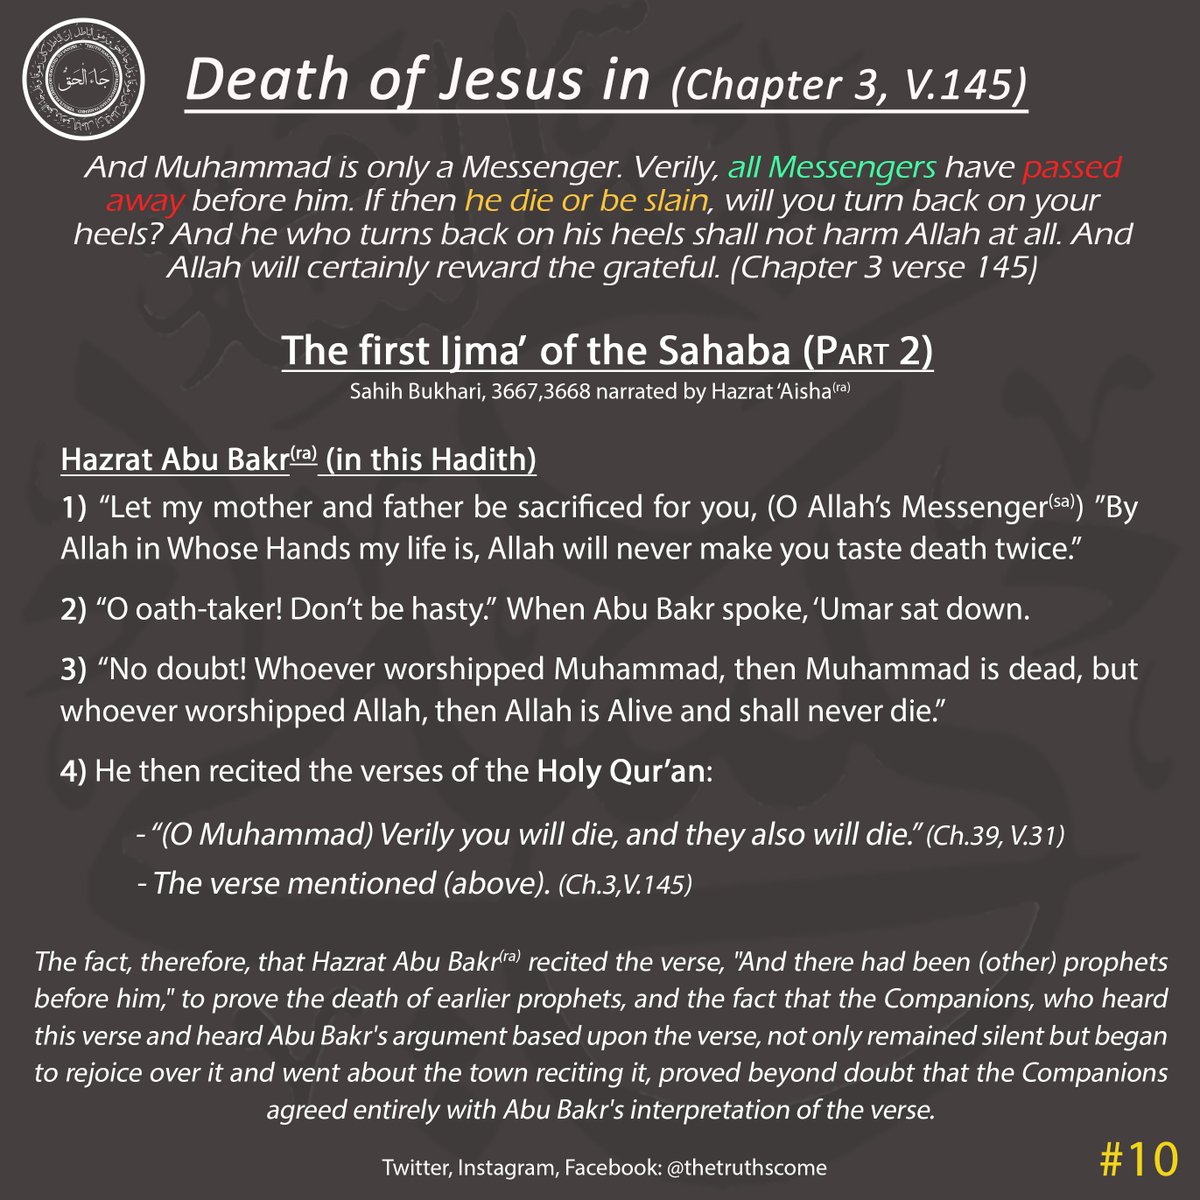 The first Ijma of the Sahaba confirms the death of all Prophets before the Holy Prophet(sa), including Jesus(as).